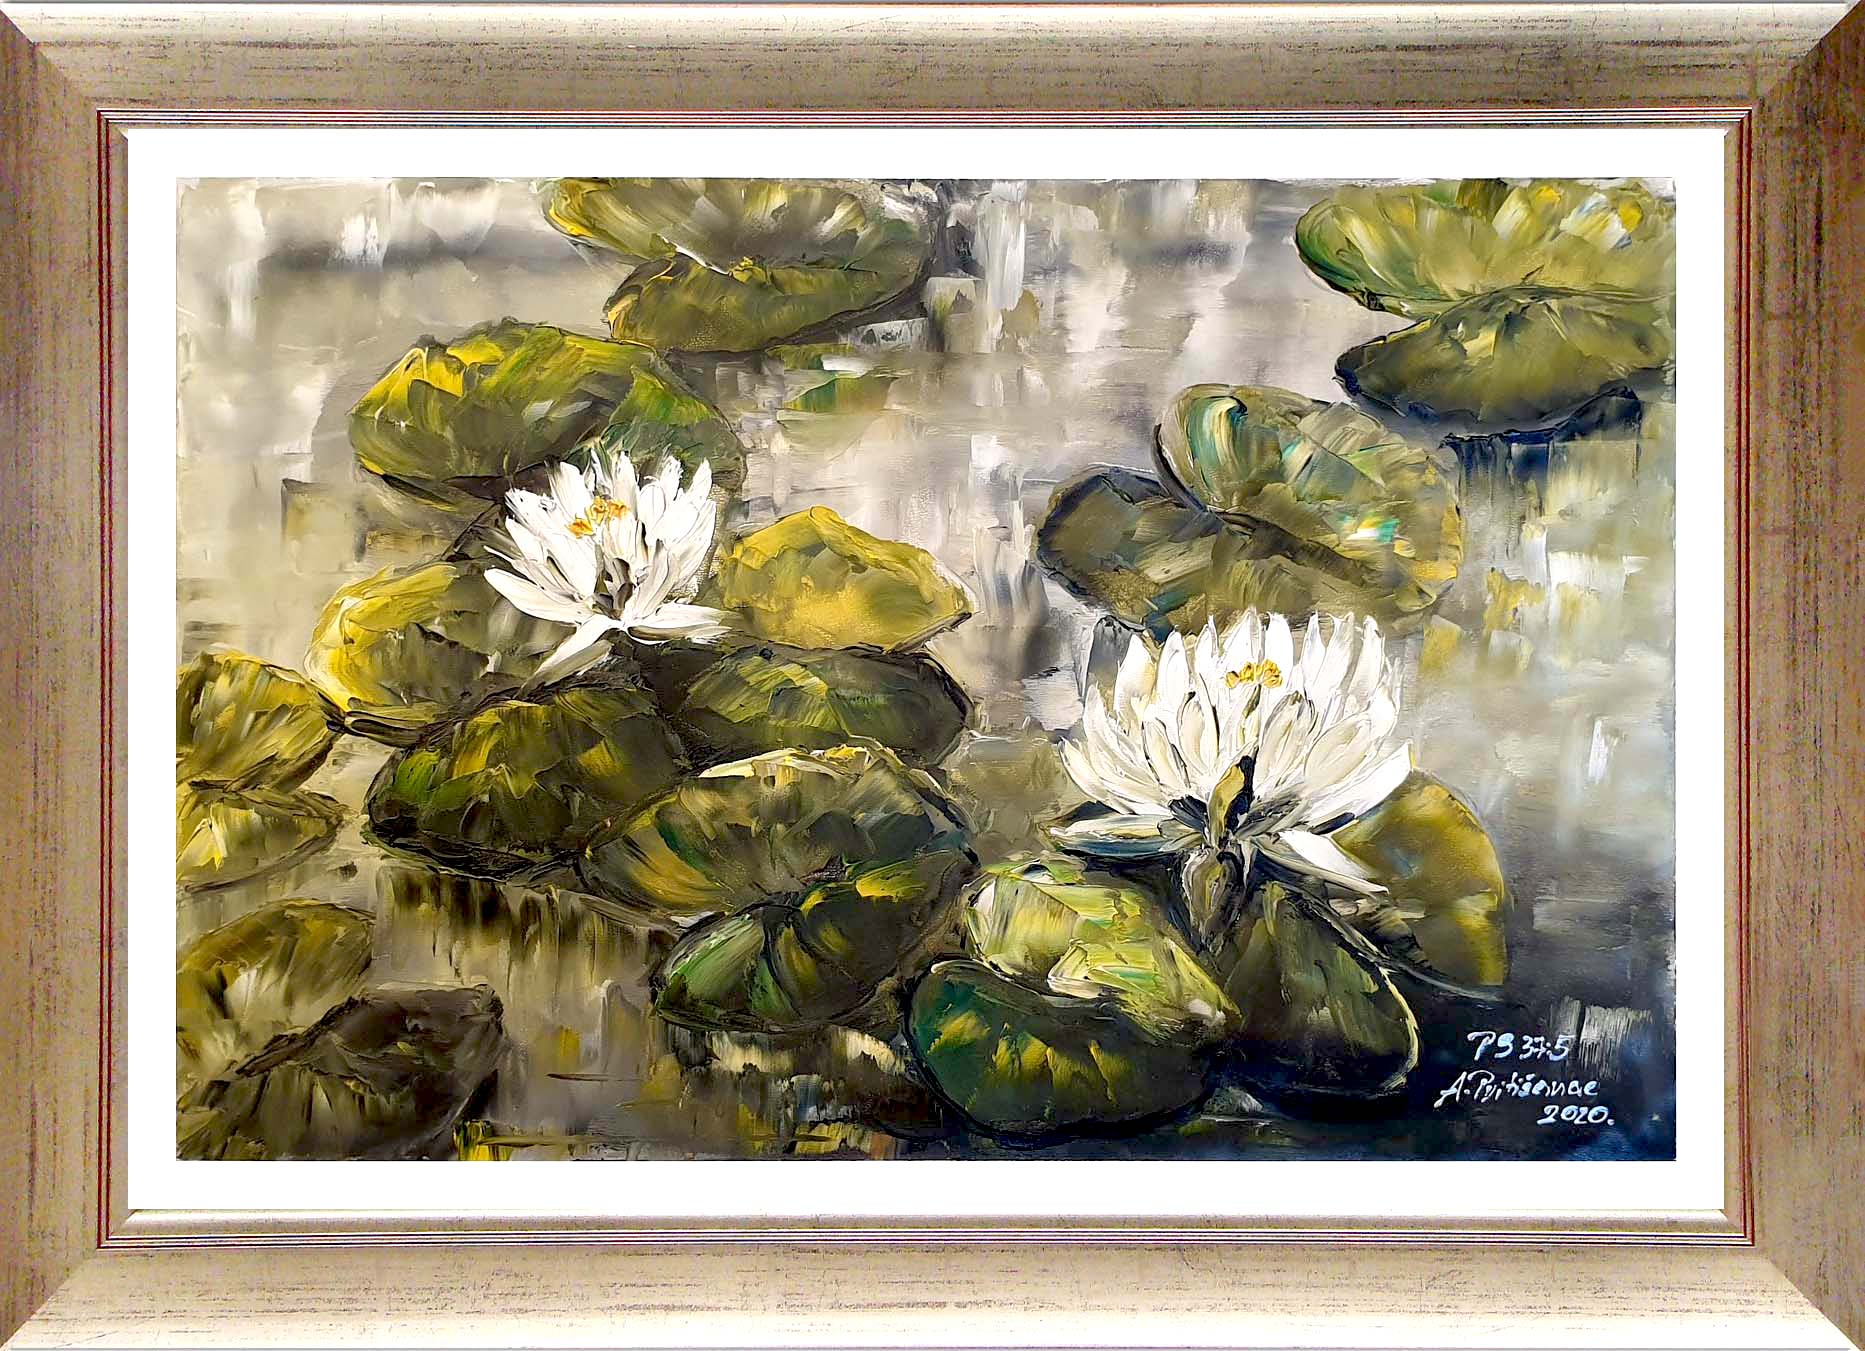 Gallery Water Lilies